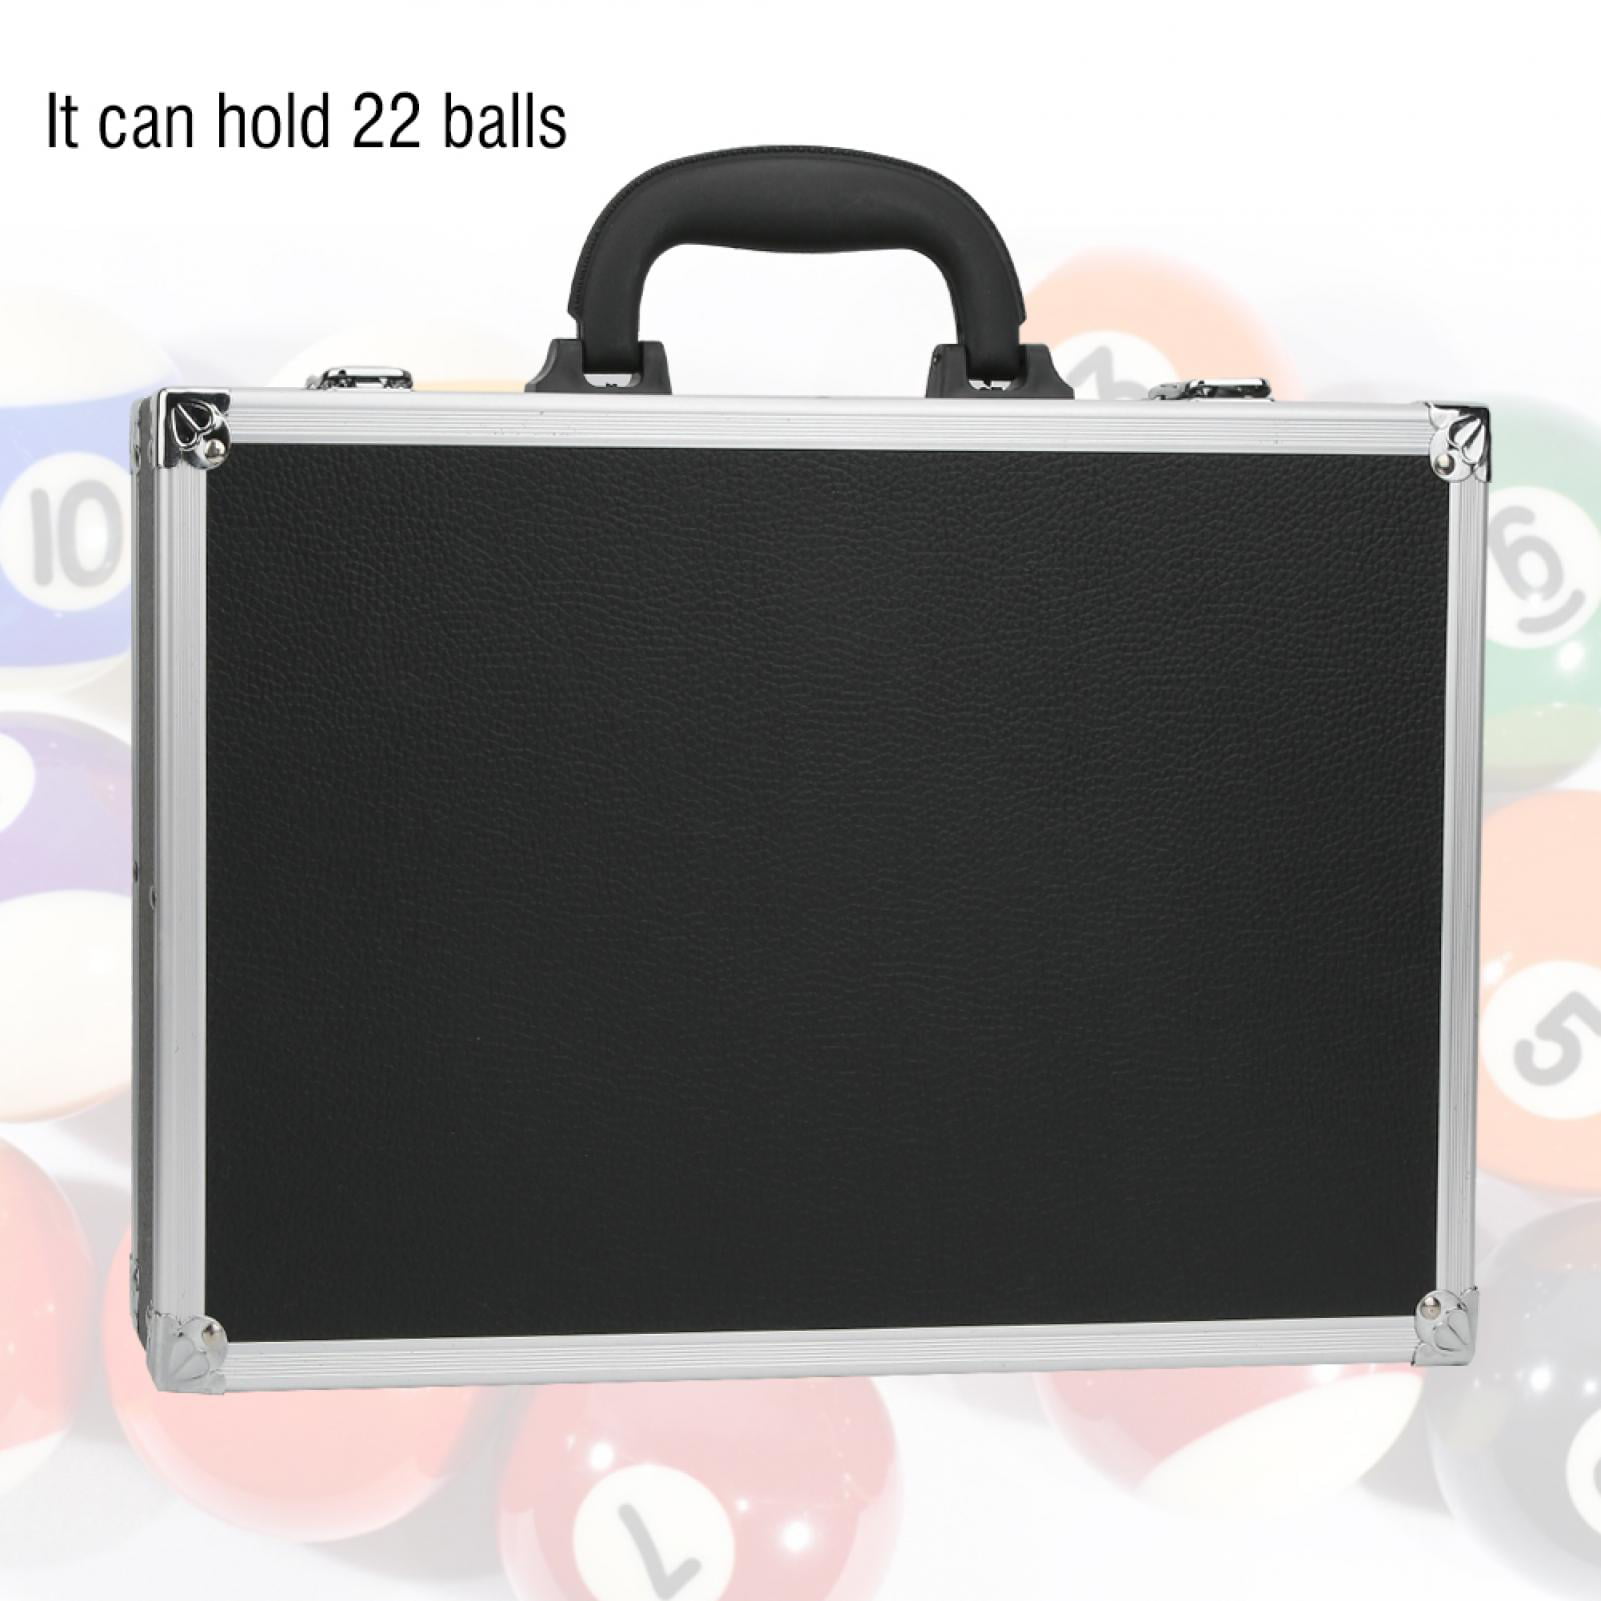 Billiard Cue Ball Bag Carrying Pool Training Ball Case Holder Accessory Portable 